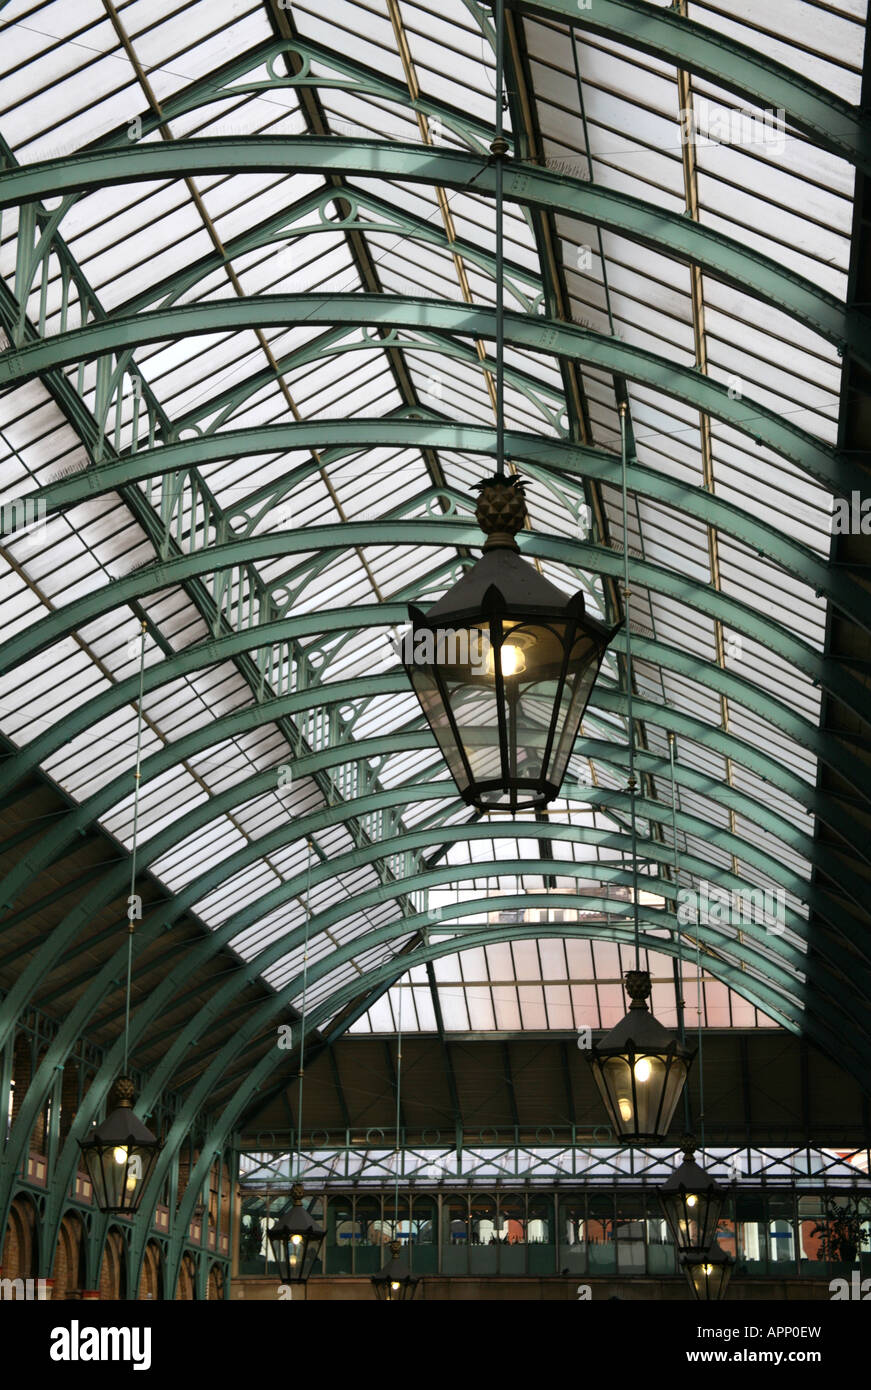 Covent Garden Jubilee hall roof 2 Stock Photo